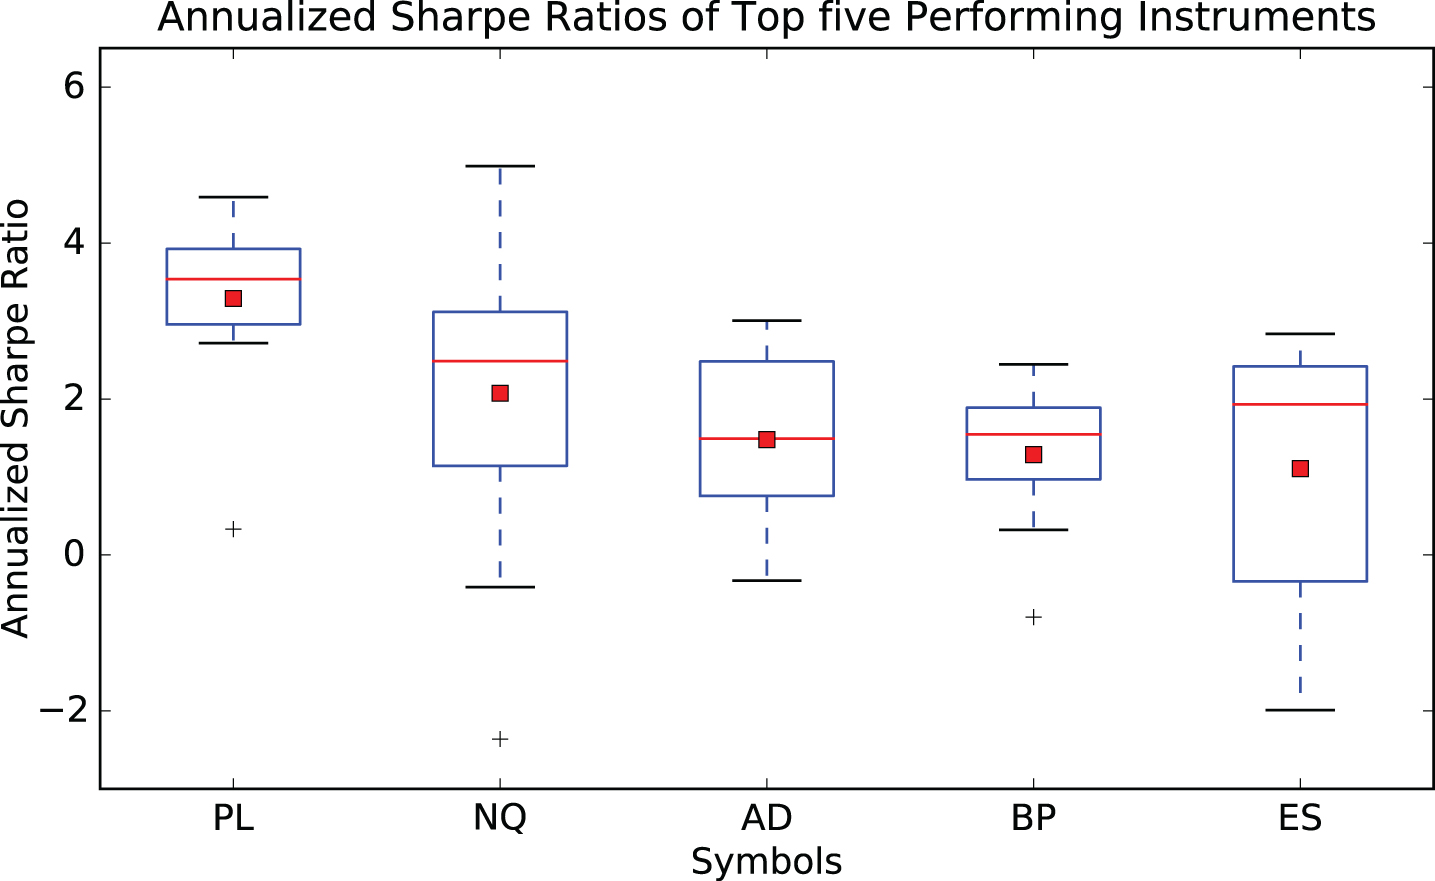 This figure shows a box plot of the distribution of the annualized Sharpe ratios sampled over ten walk forward experiments of 12,500 observation points. Only the top five performing futures contracts have been considered. The simple trading strategy is described above. Key: PL: Platinum, NQ: E-mini NASDAQ 100 Futures, AD: Australian Dollar, BP: British Pound, ES: E-mini S&P 500 Futures.